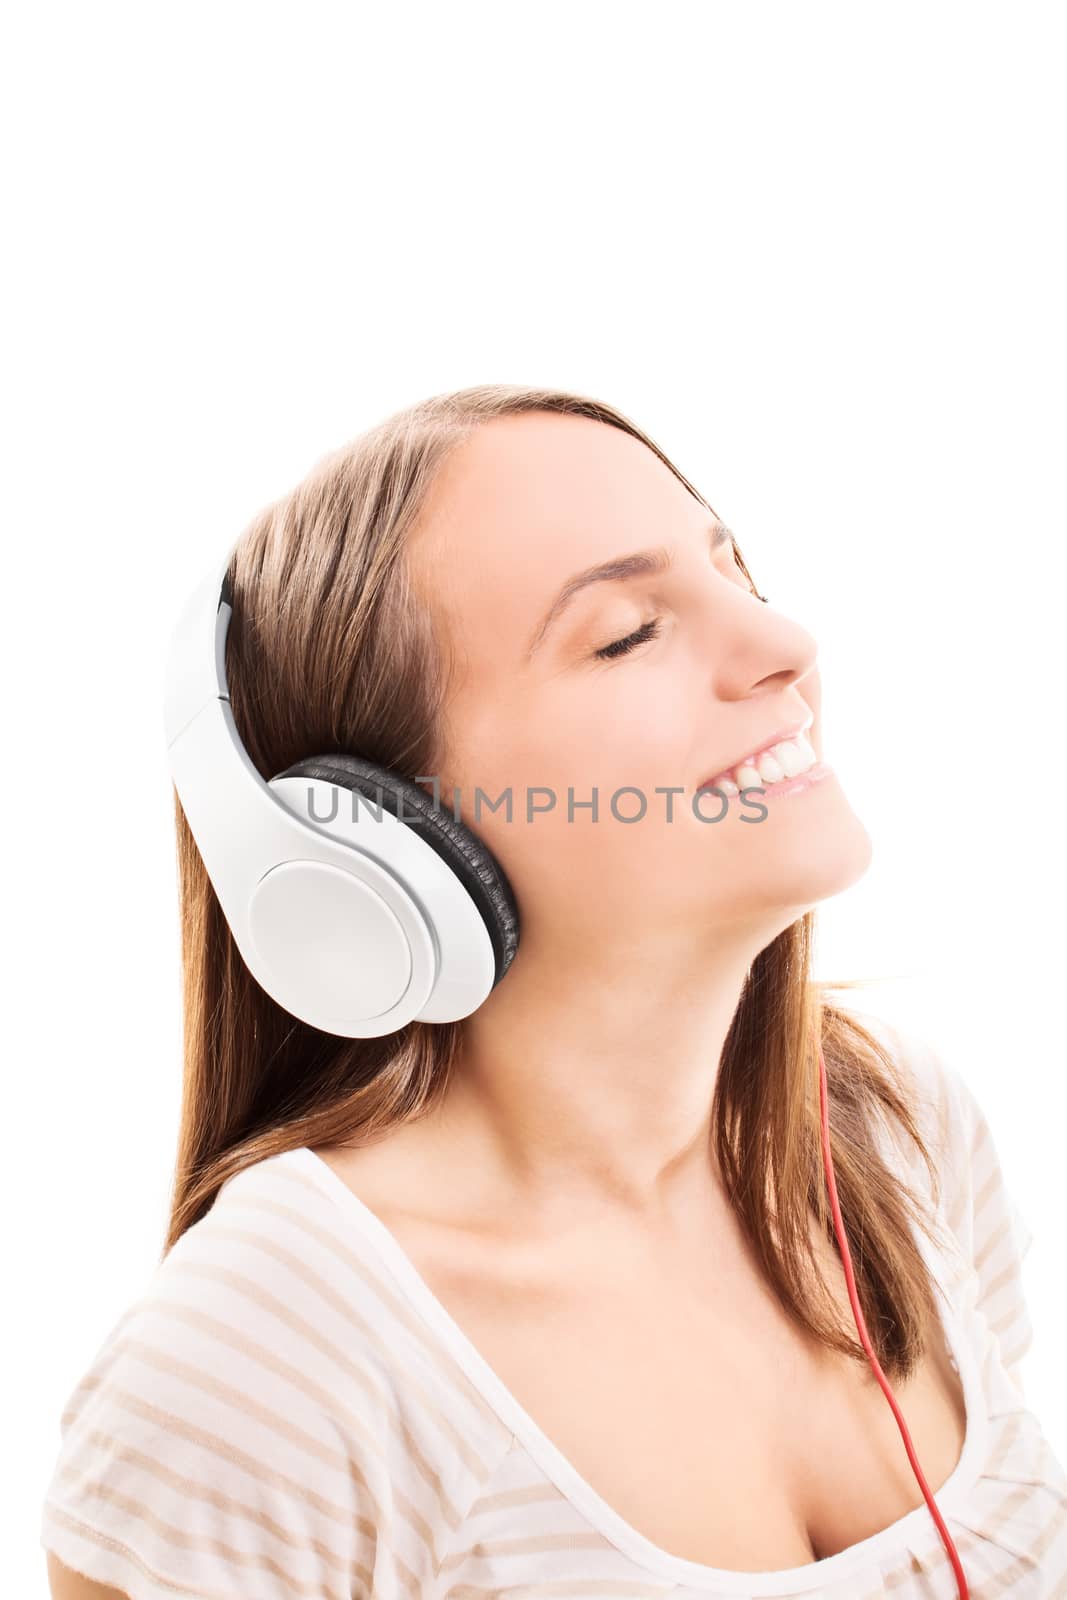 Beautiful young girl with headphones listening to music, isolated on white background.